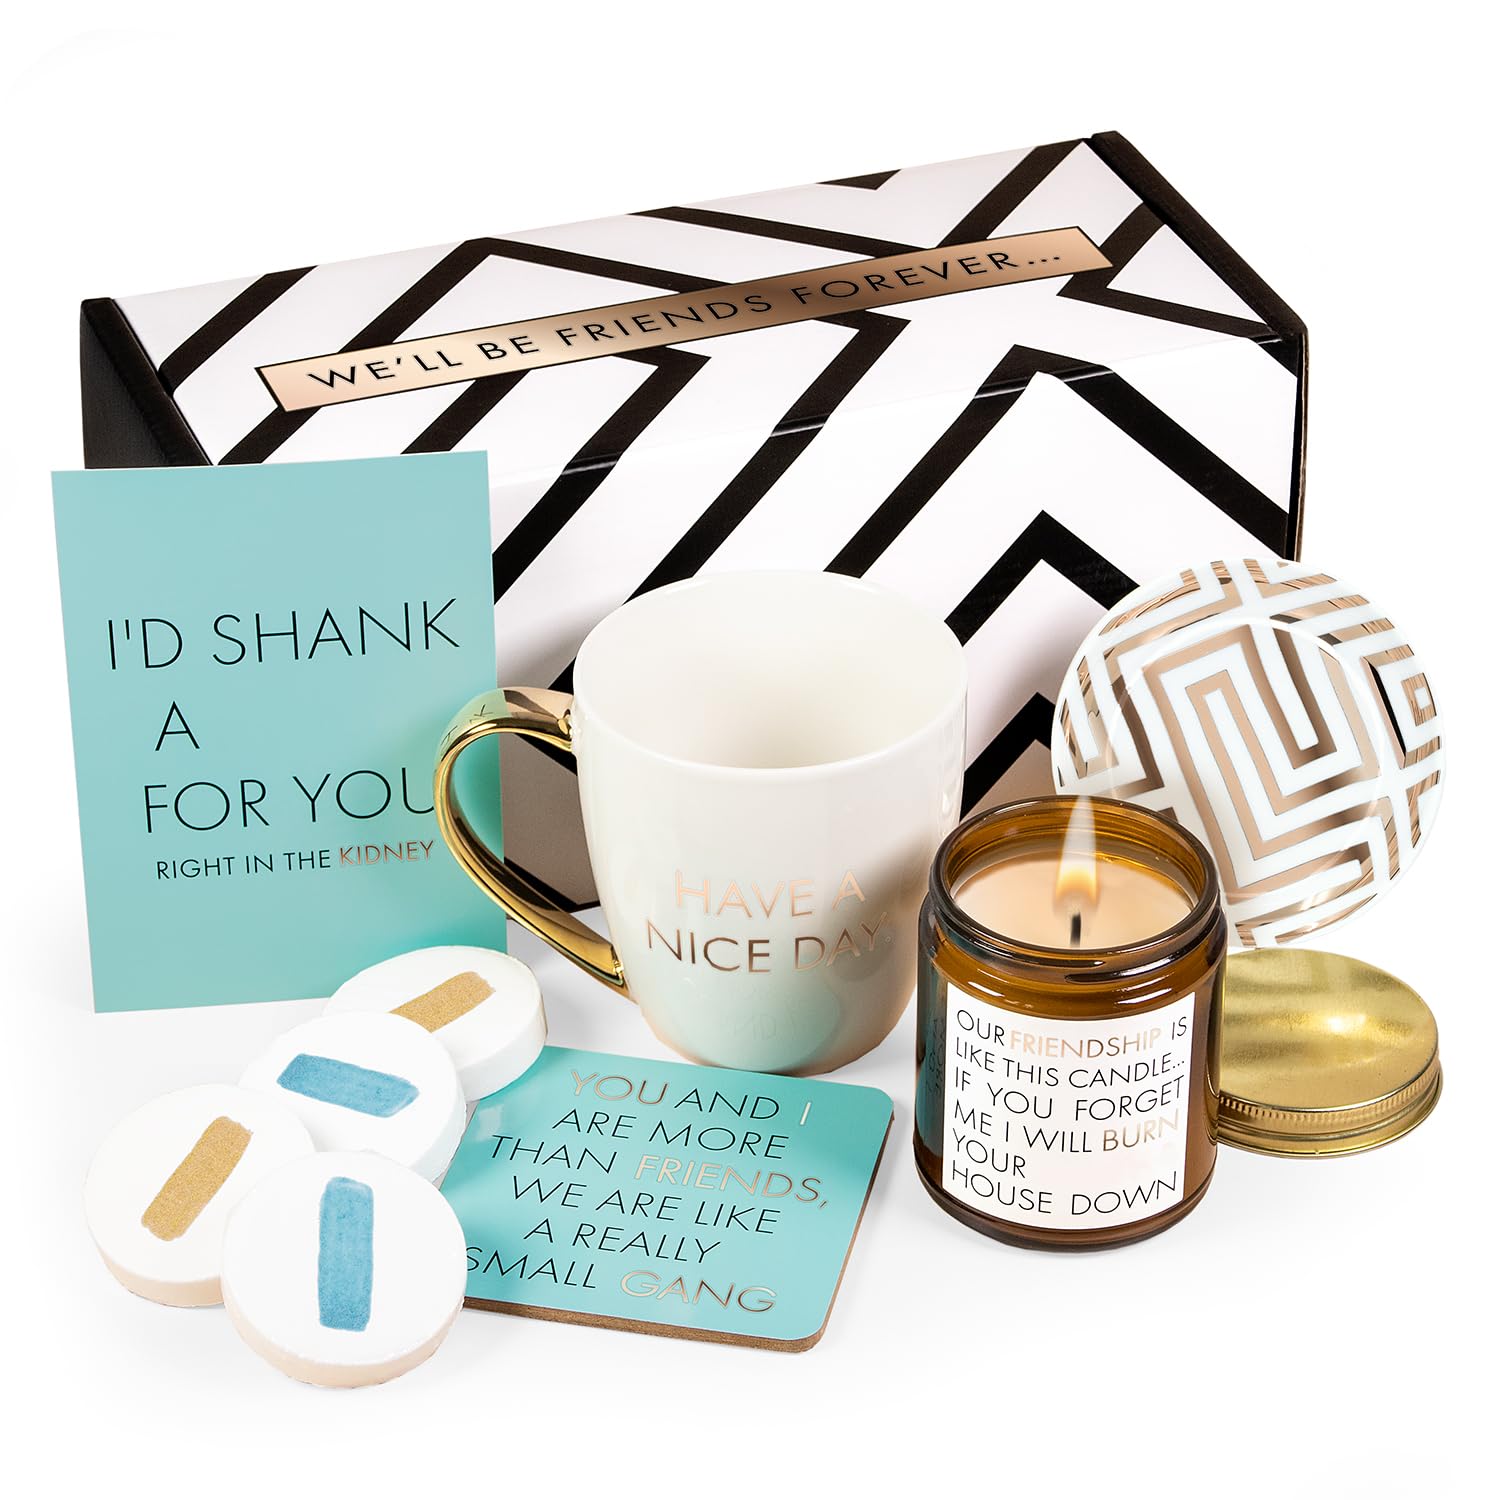 Luxe England Gifts Funny Friend Gifts for Women - Unique Funny Gift Box Great as Birthday Gifts for Best Friend Woman, Funny Gifts for Friends, Friendship Gifts for Women